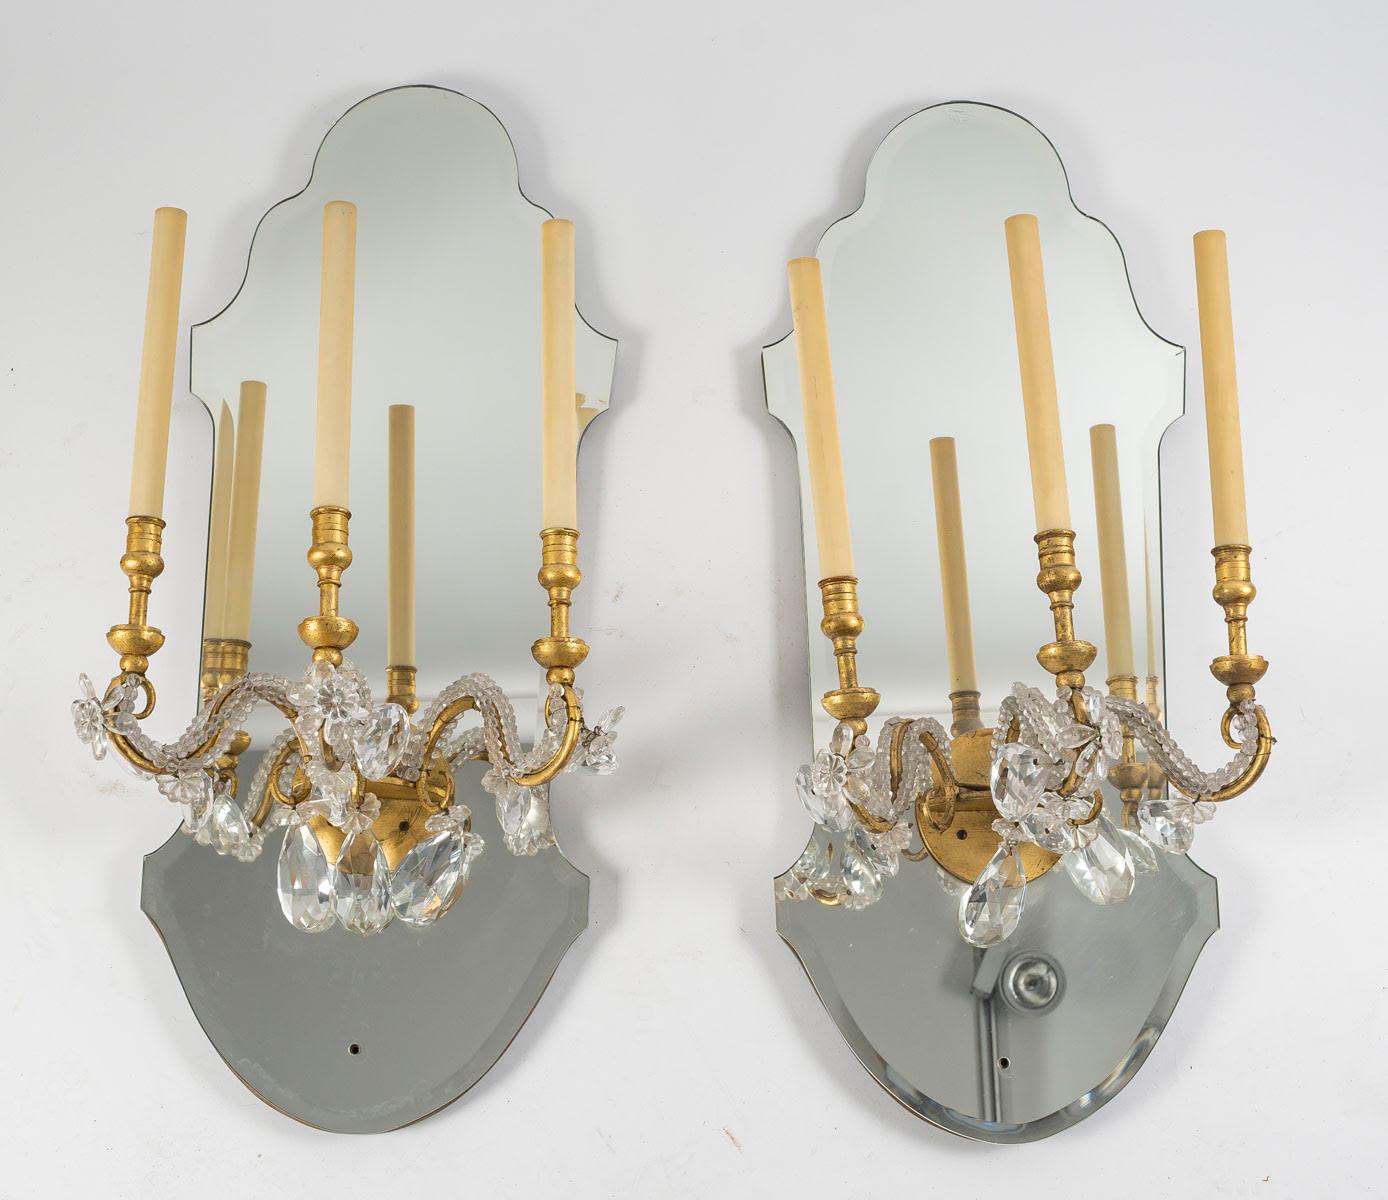 Suite of 4 gilded iron and mirror sconces with glass drops, 1950-1960.

Suite of 4 sconces from the Maison Delisle, 1950-1960, in mirror and gilded iron with glass pendants.  
h: 85cm, w: 33cm, d: 30cm